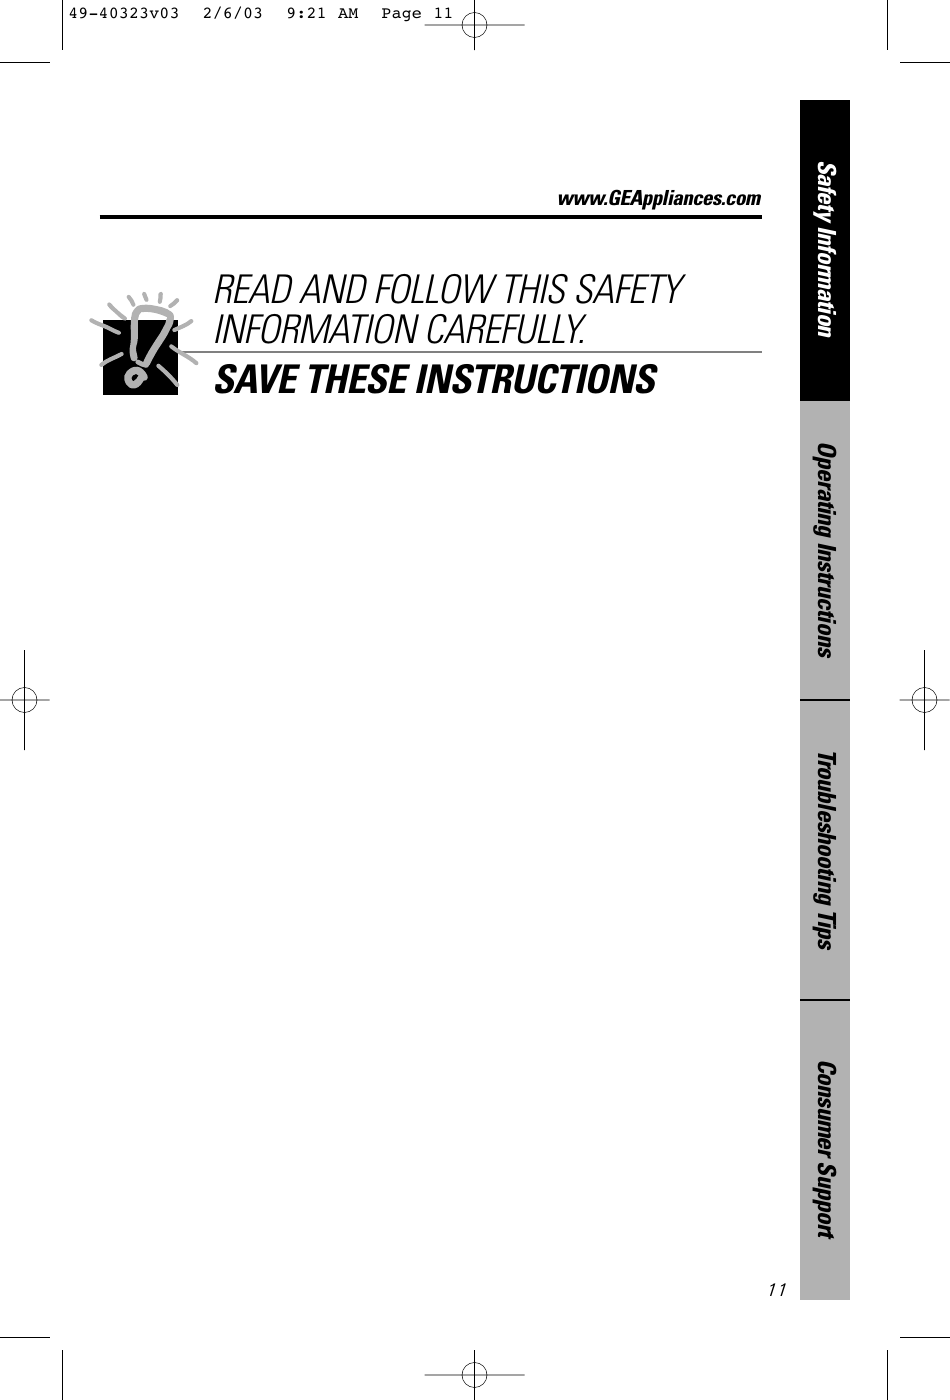 Consumer SupportTroubleshooting TipsOperating InstructionsSafety Information11READ AND FOLLOW THIS SAFETYINFORMATION CAREFULLY.SAVE THESE INSTRUCTIONSwww.GEAppliances.com49-40323v03  2/6/03  9:21 AM  Page 11